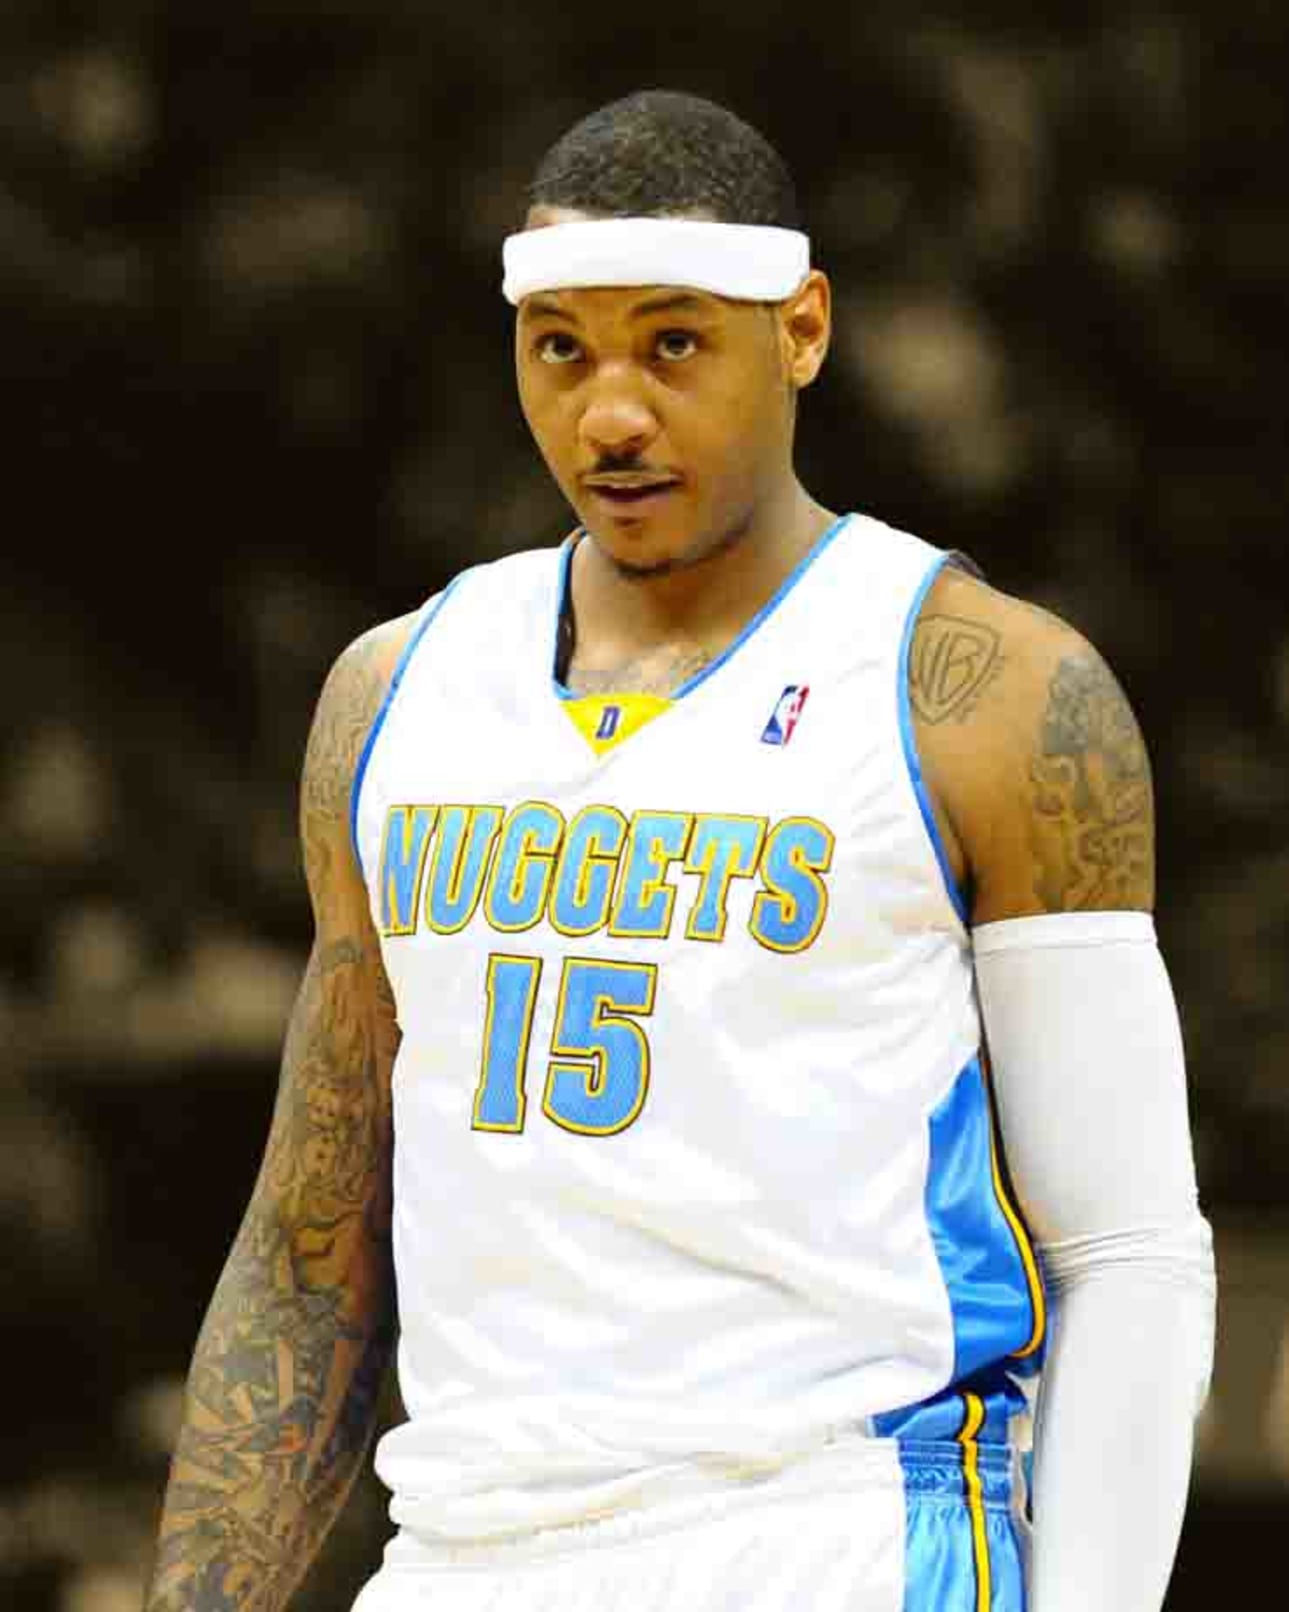 USA Today's All USA basketball player Carmelo Anthony of Oak Hill